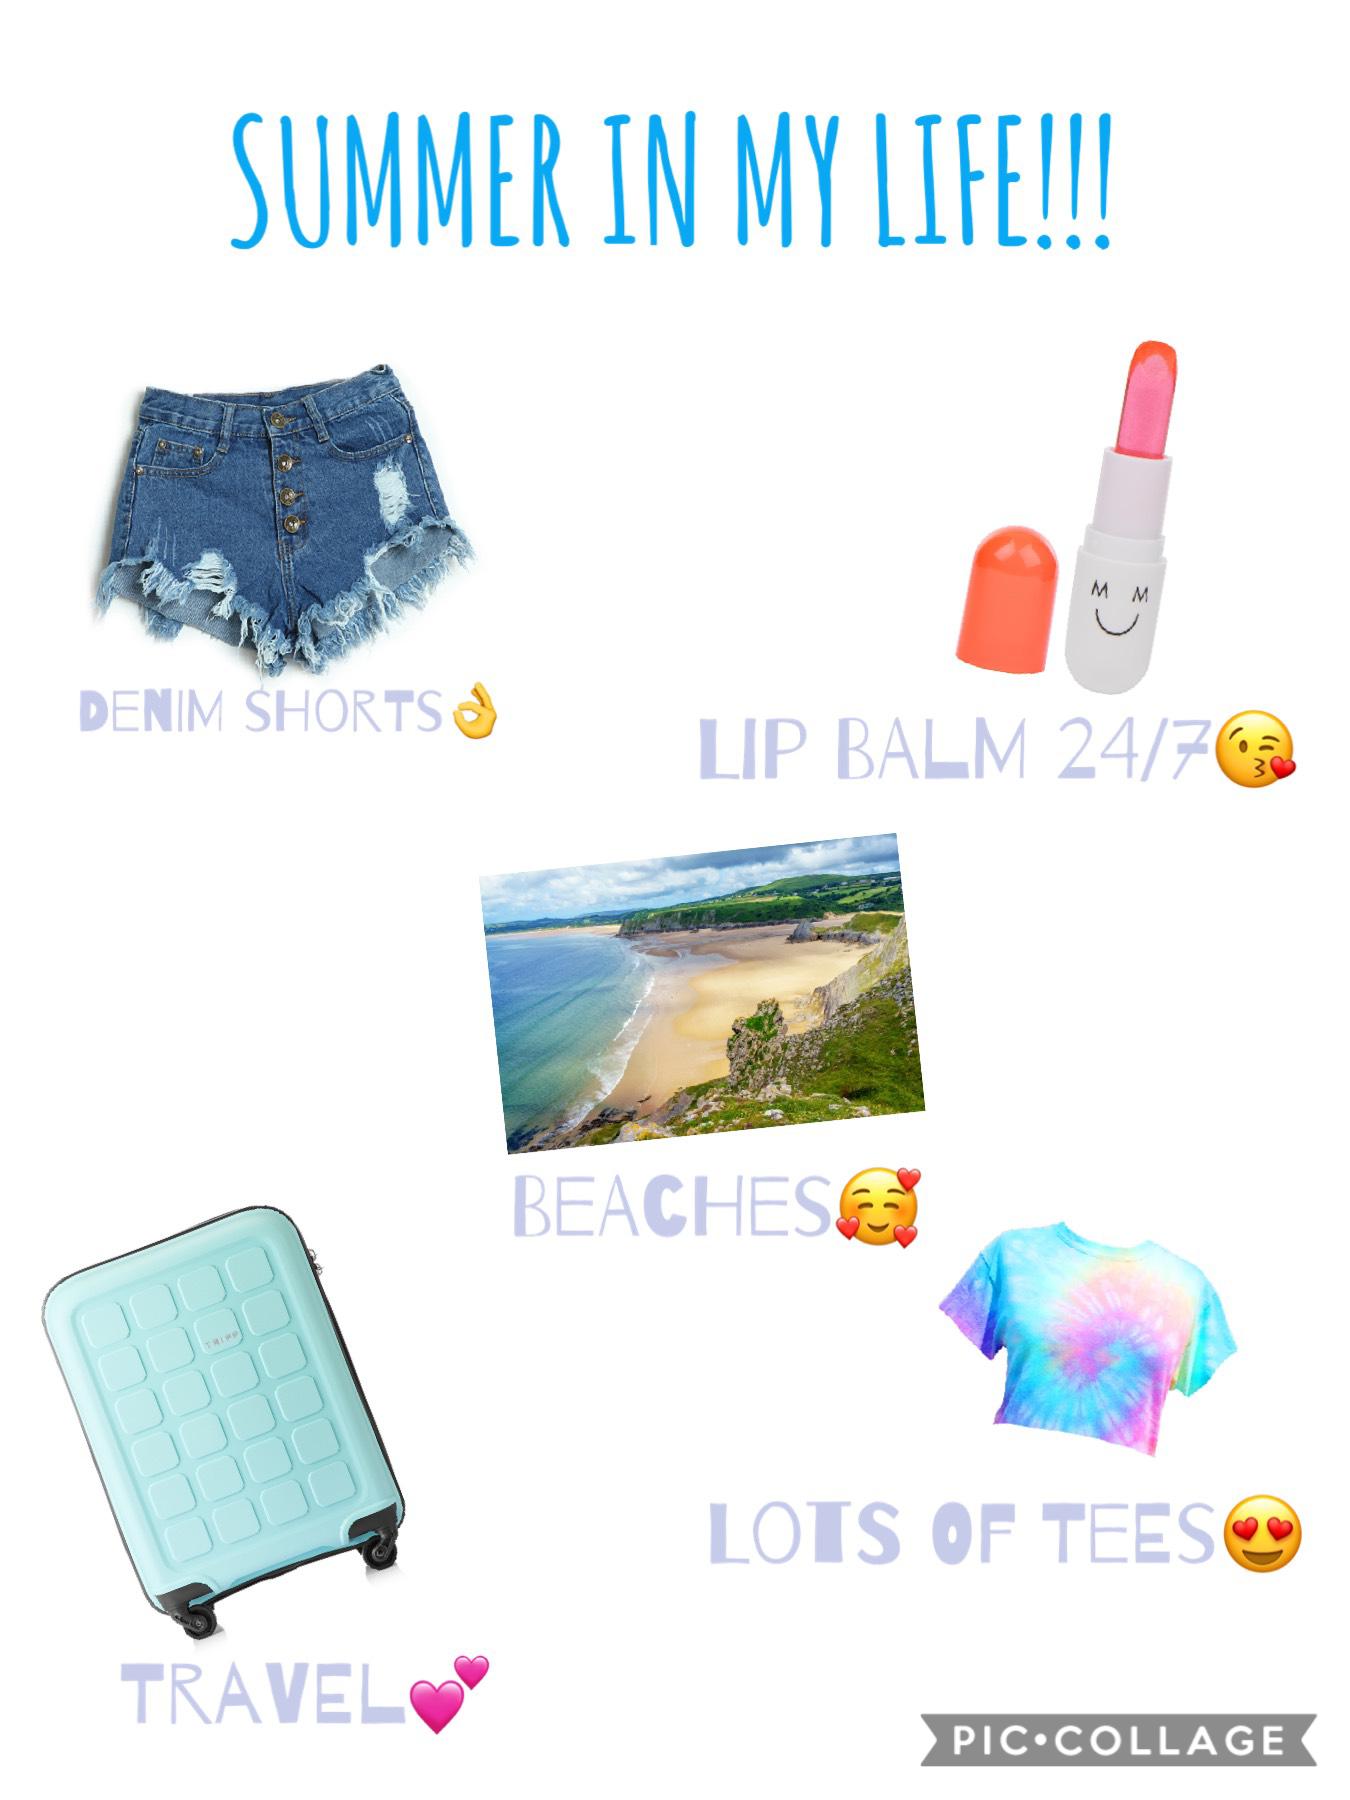 Here’s a summer collage in the life of me!!💕